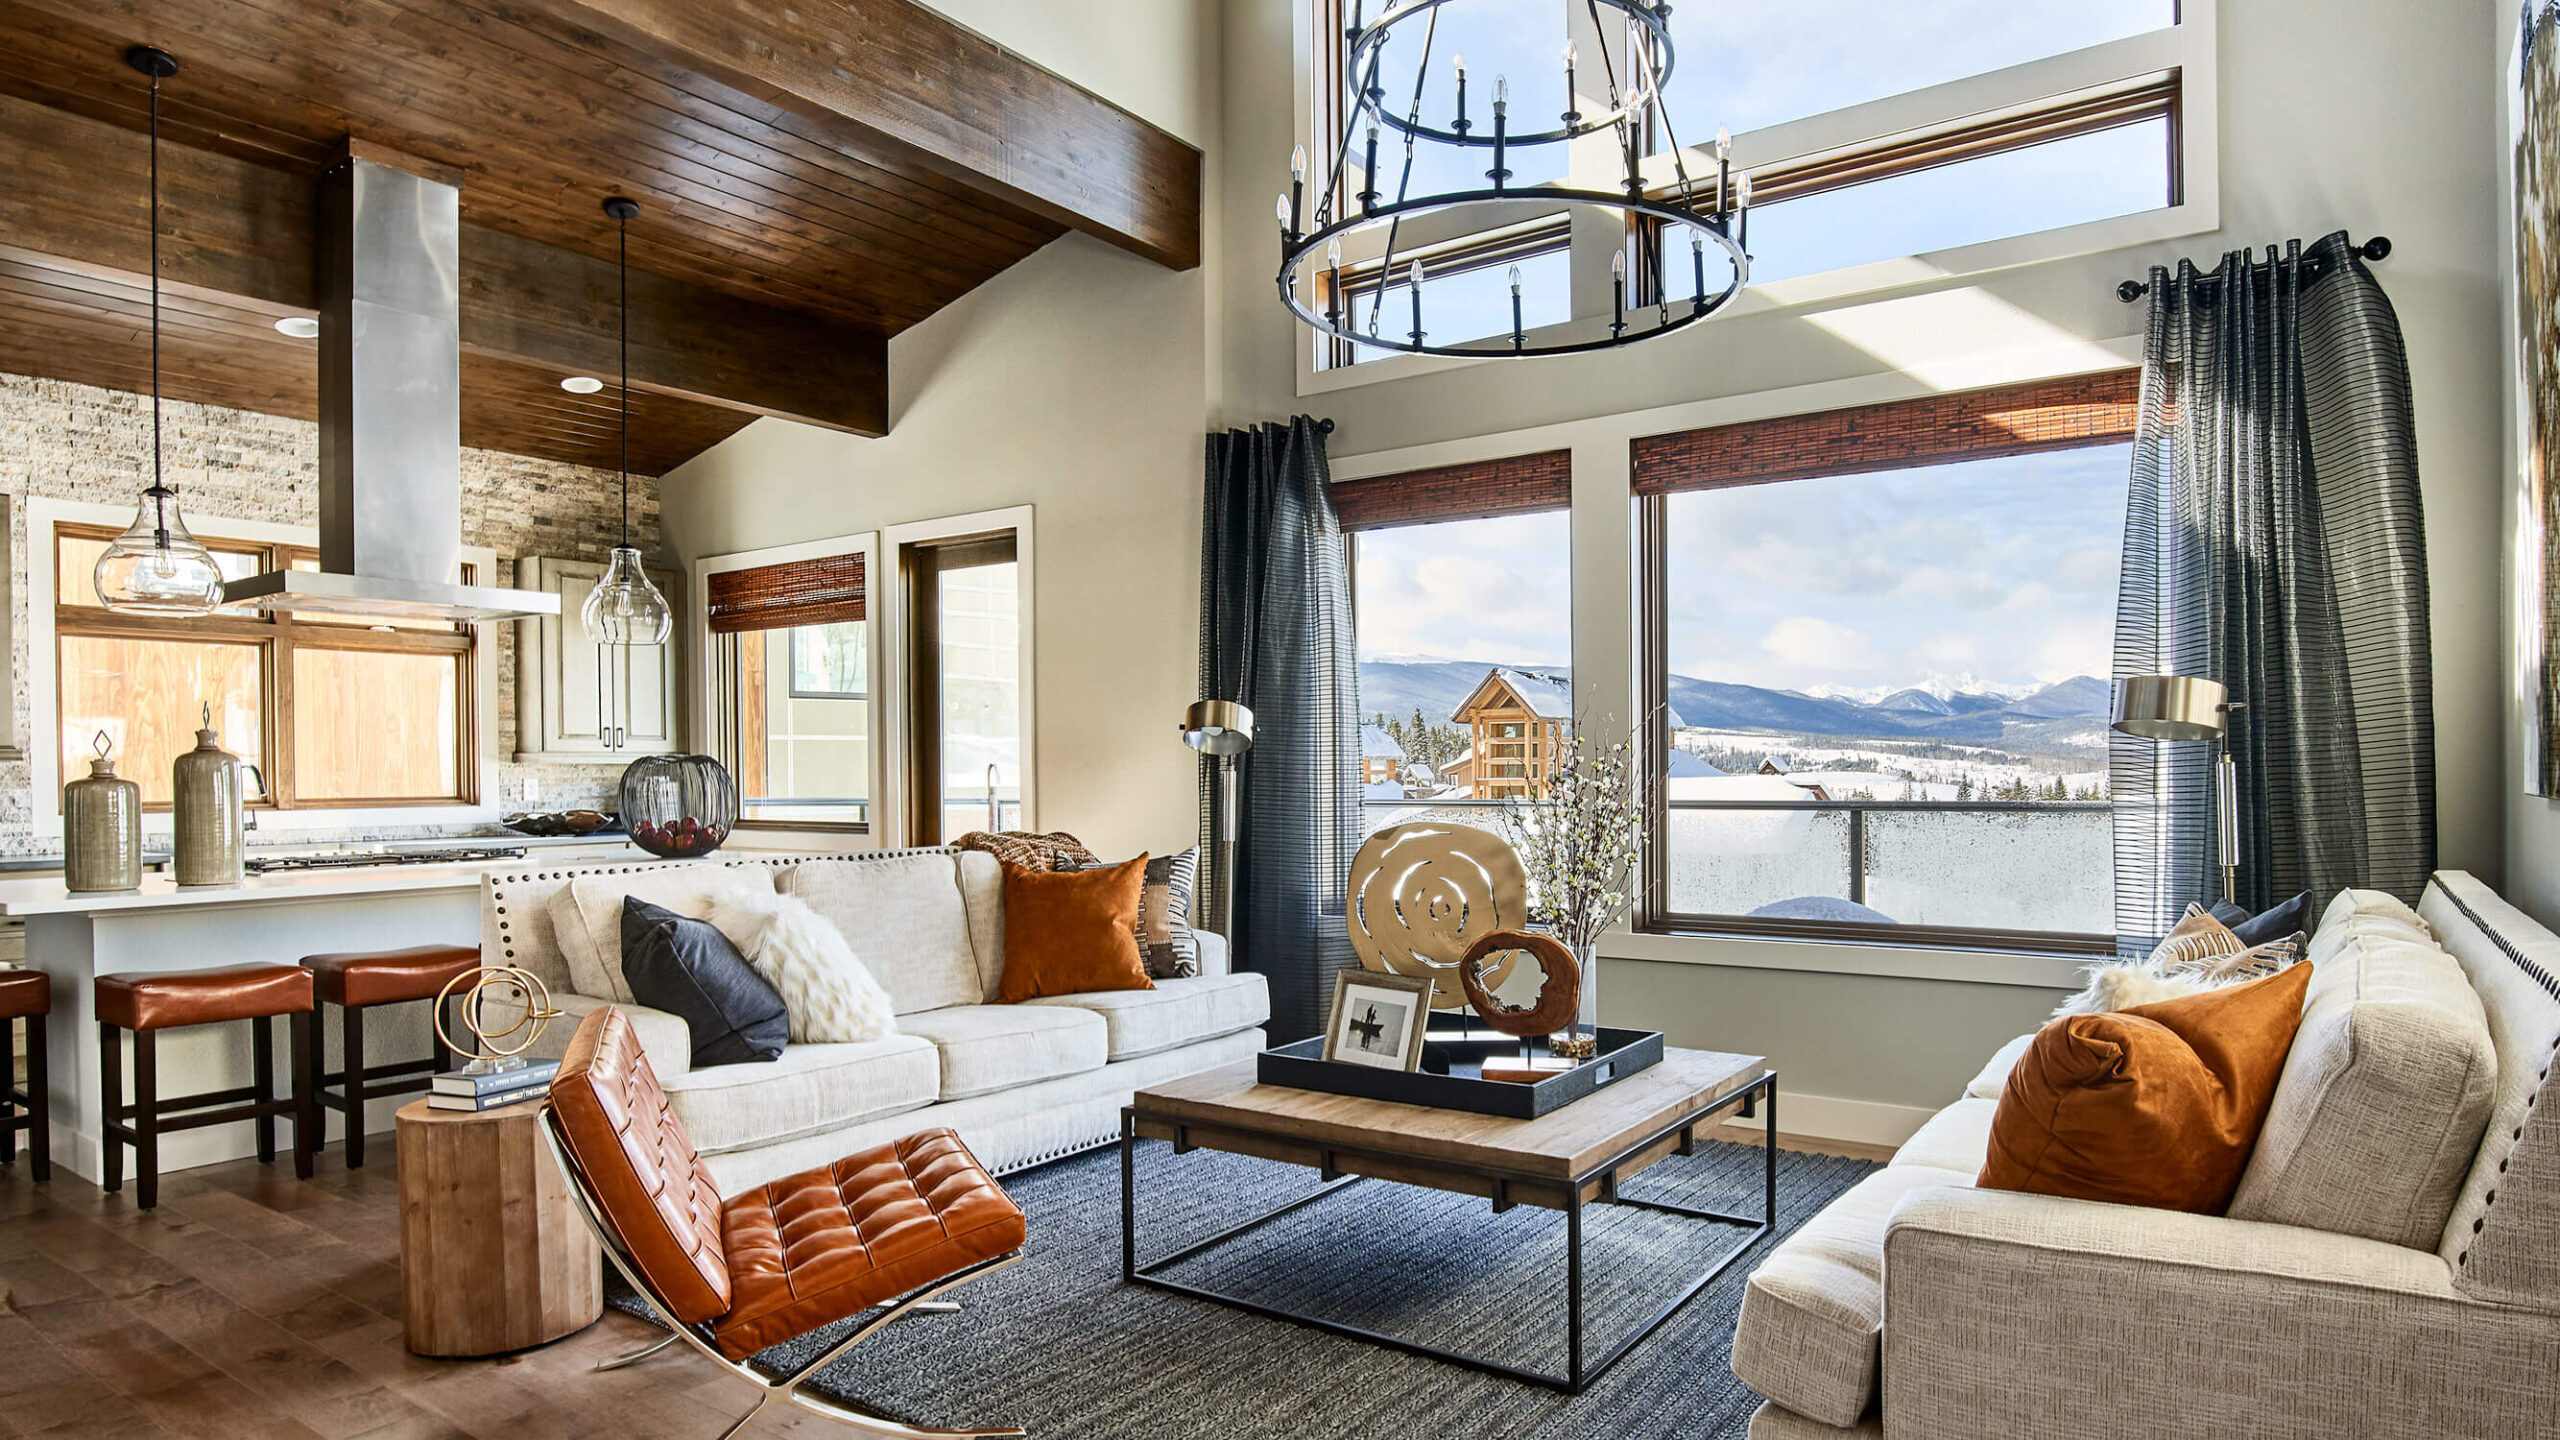 Living room interior with mountain views